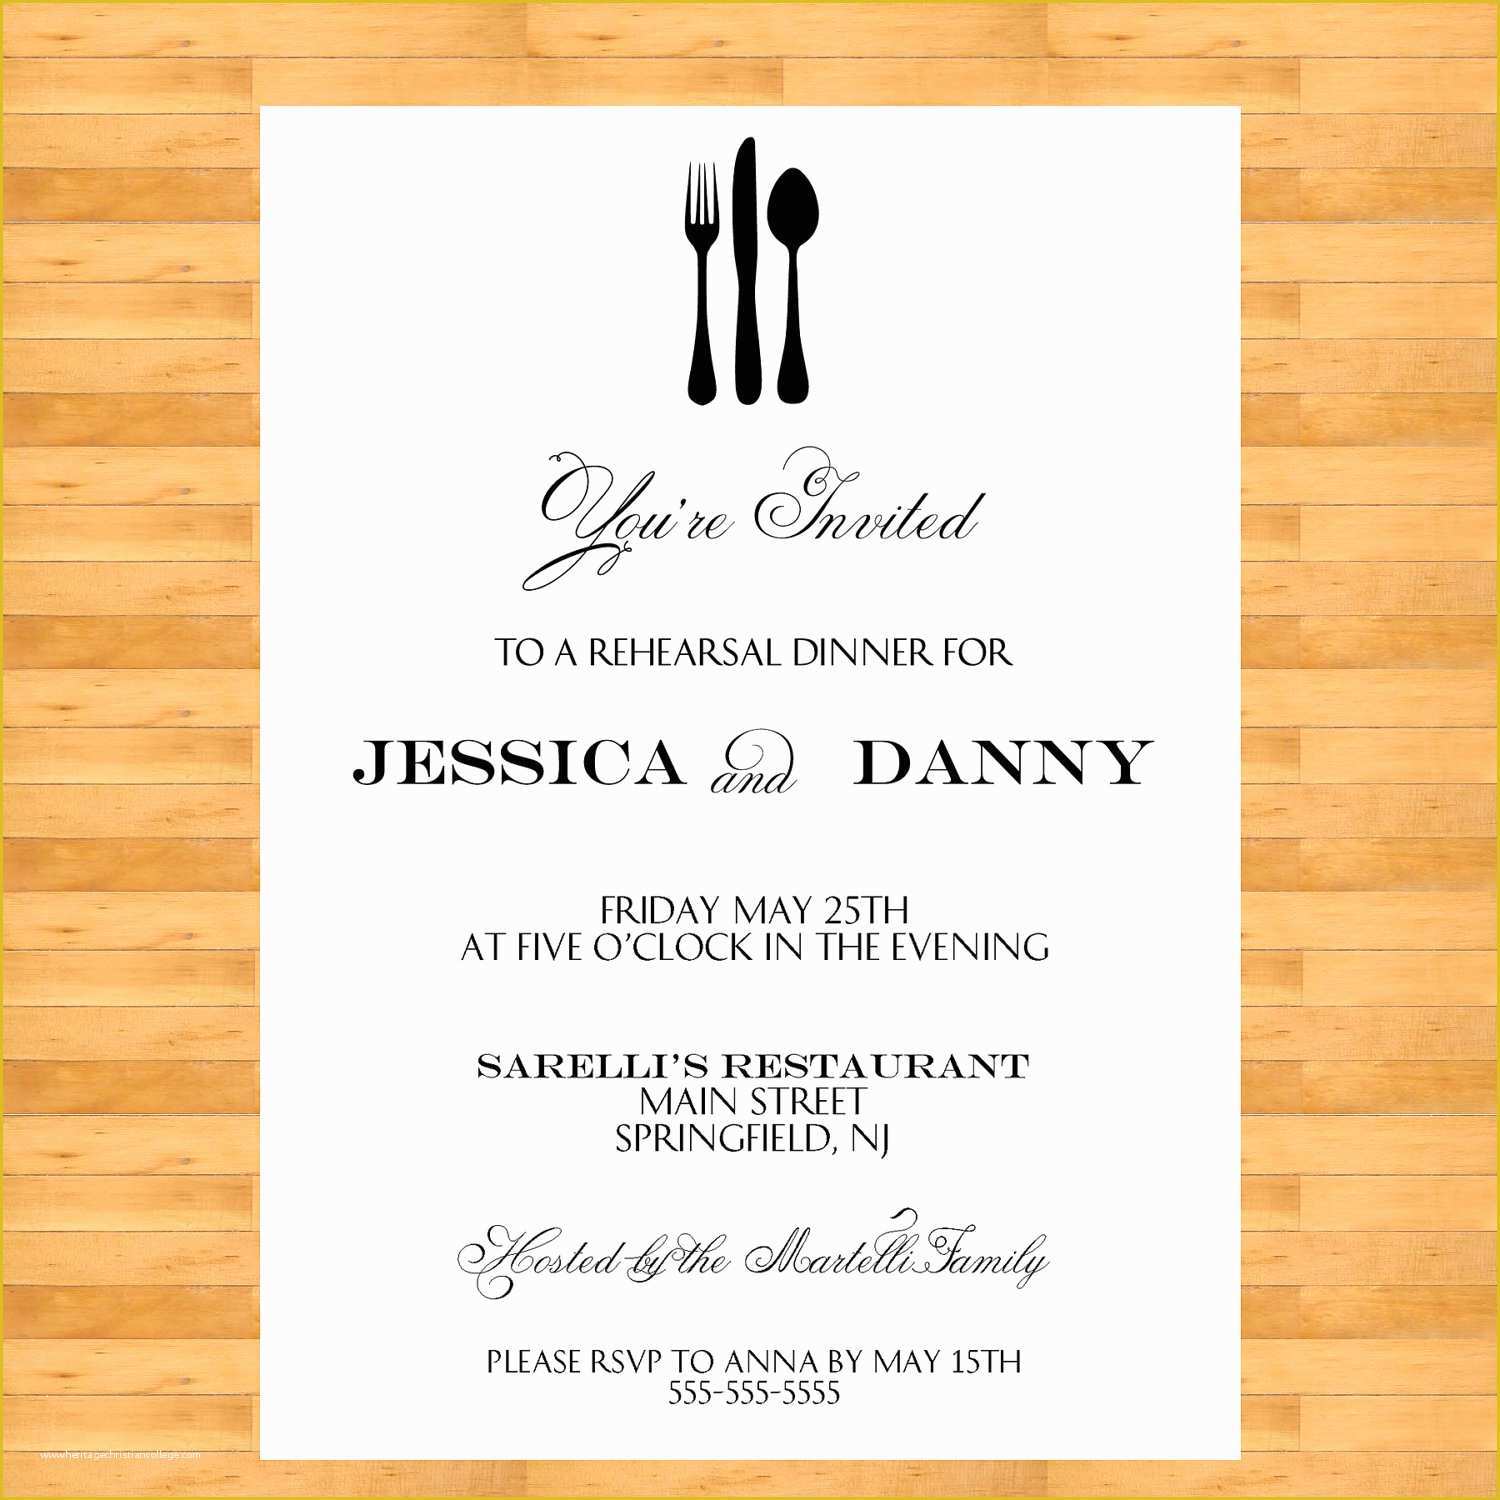 Free Printable Dinner Party Invitations Templates Of Dinner Party Invitations Templates thebridgesummit Best